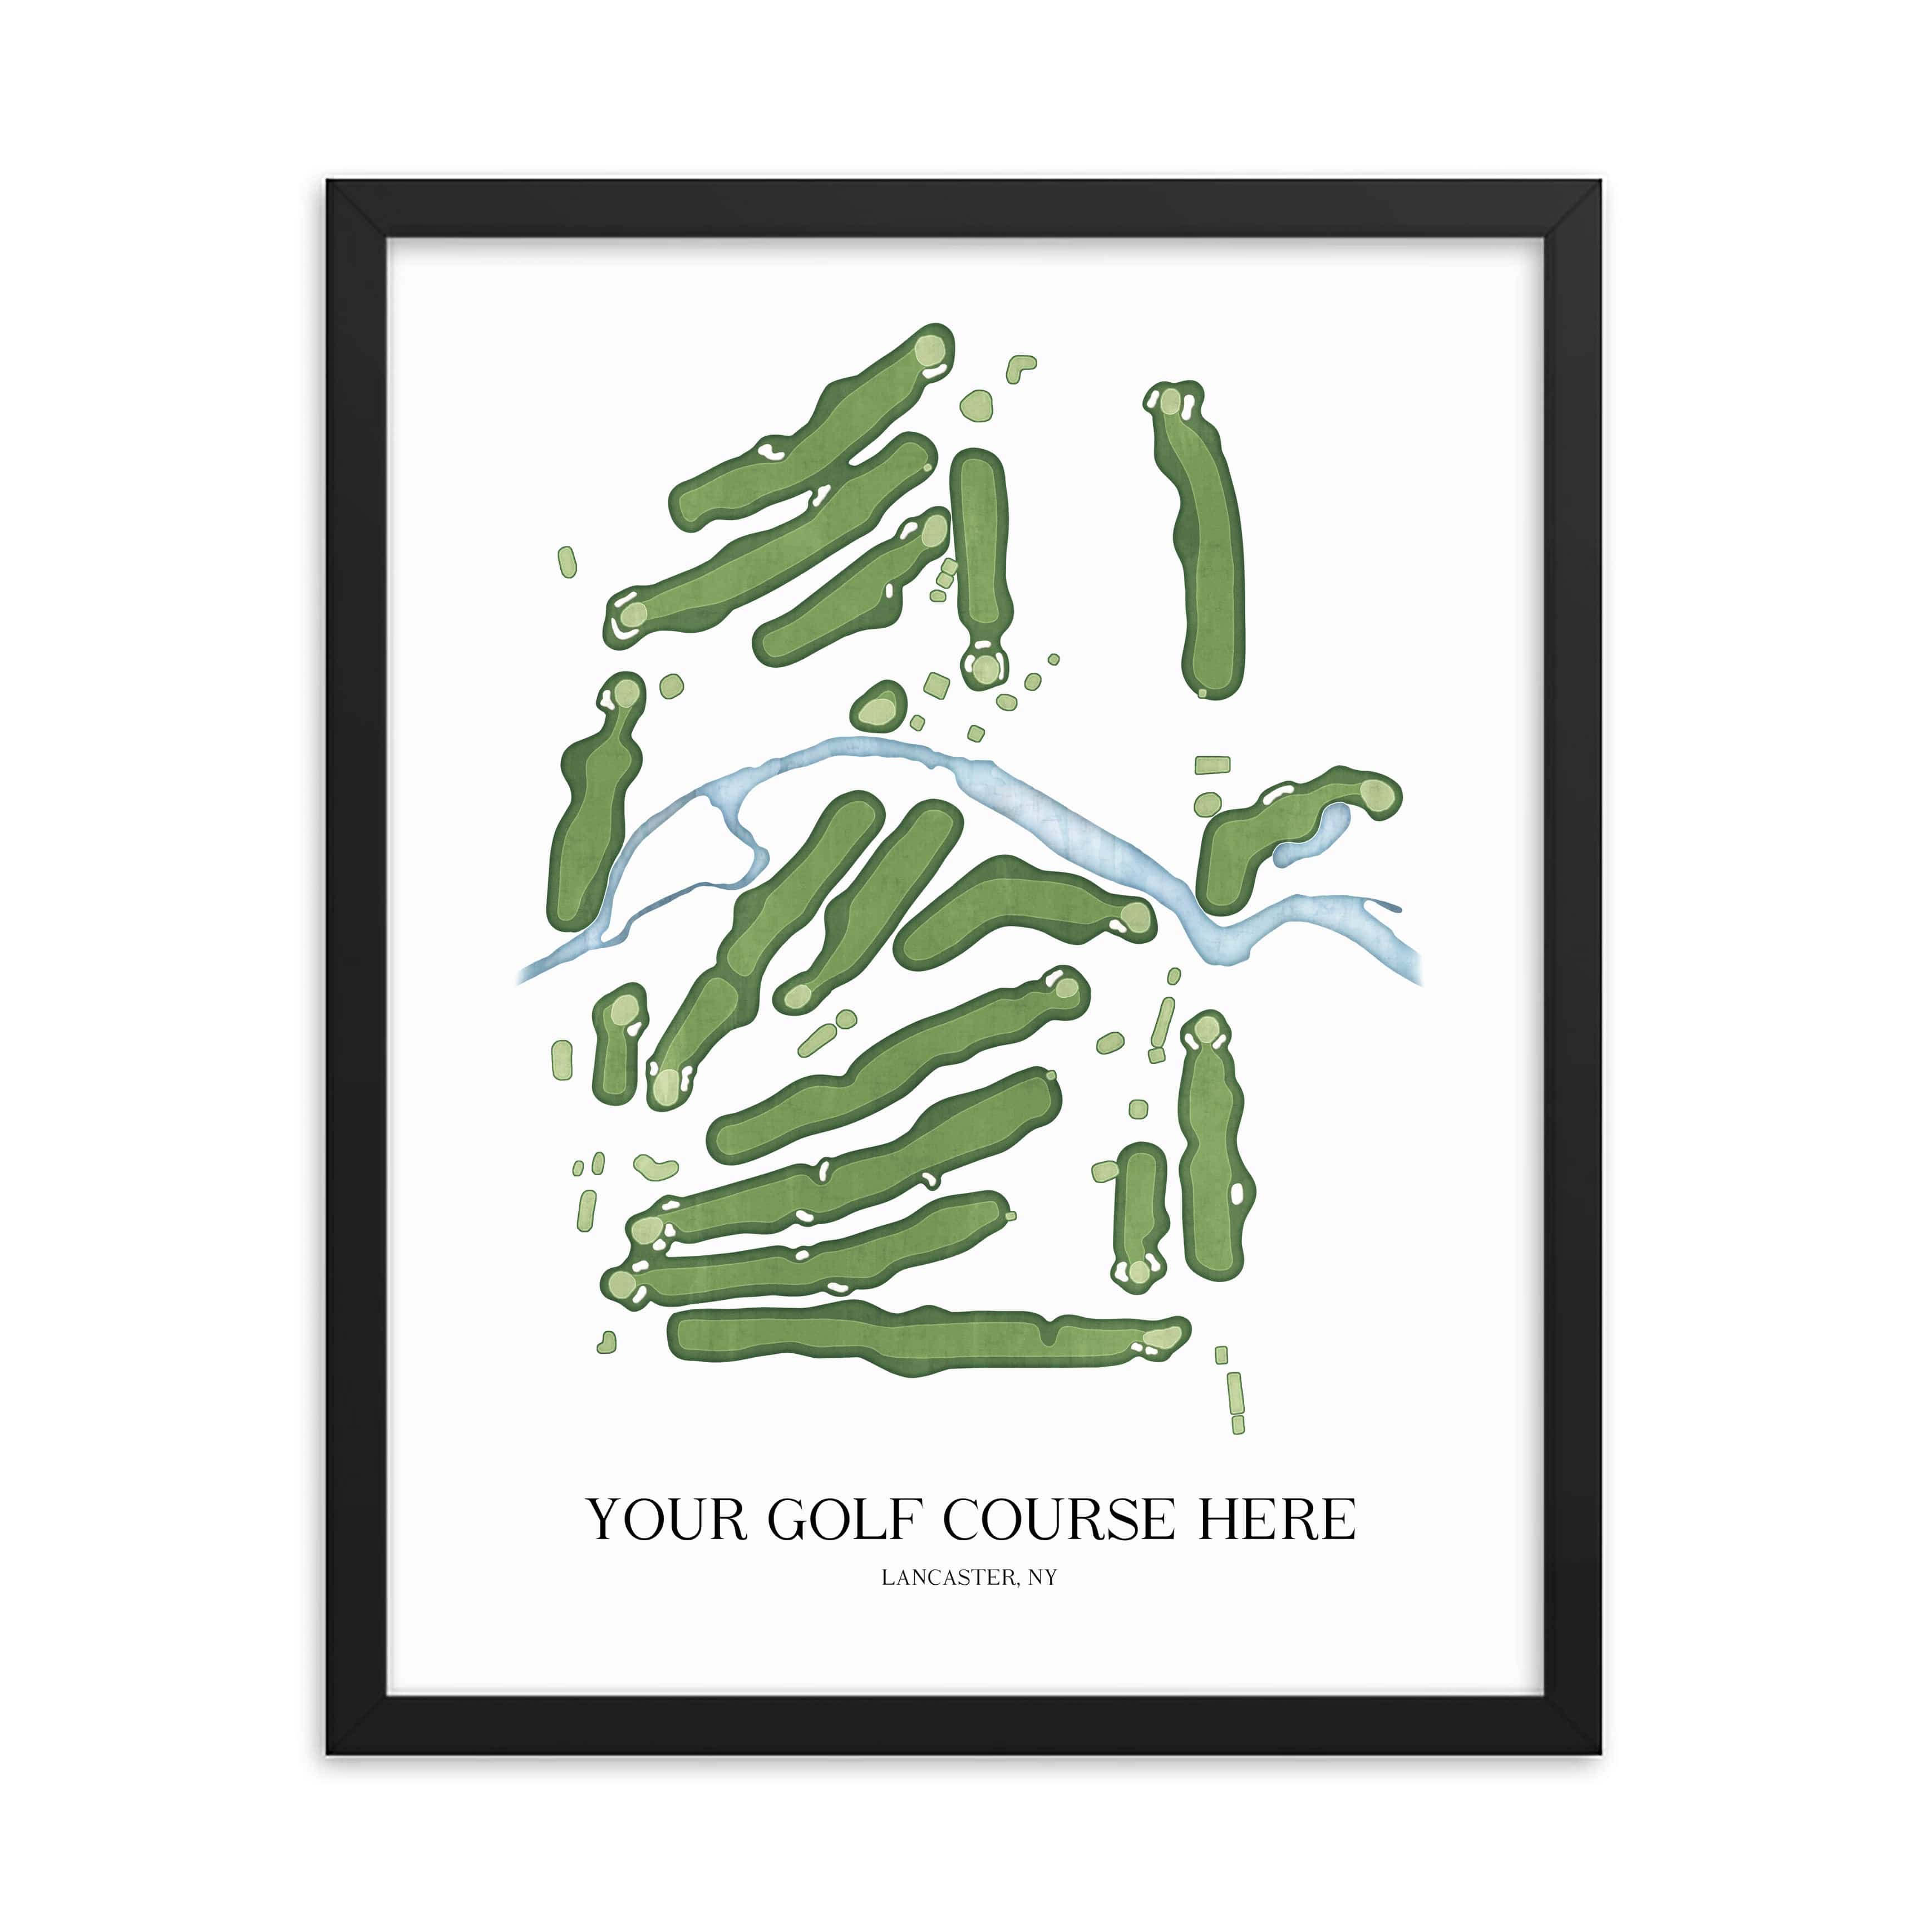 The 19th Hole Golf Shop - Golf Course Prints -  -Custom Course Request- Golf Course Map